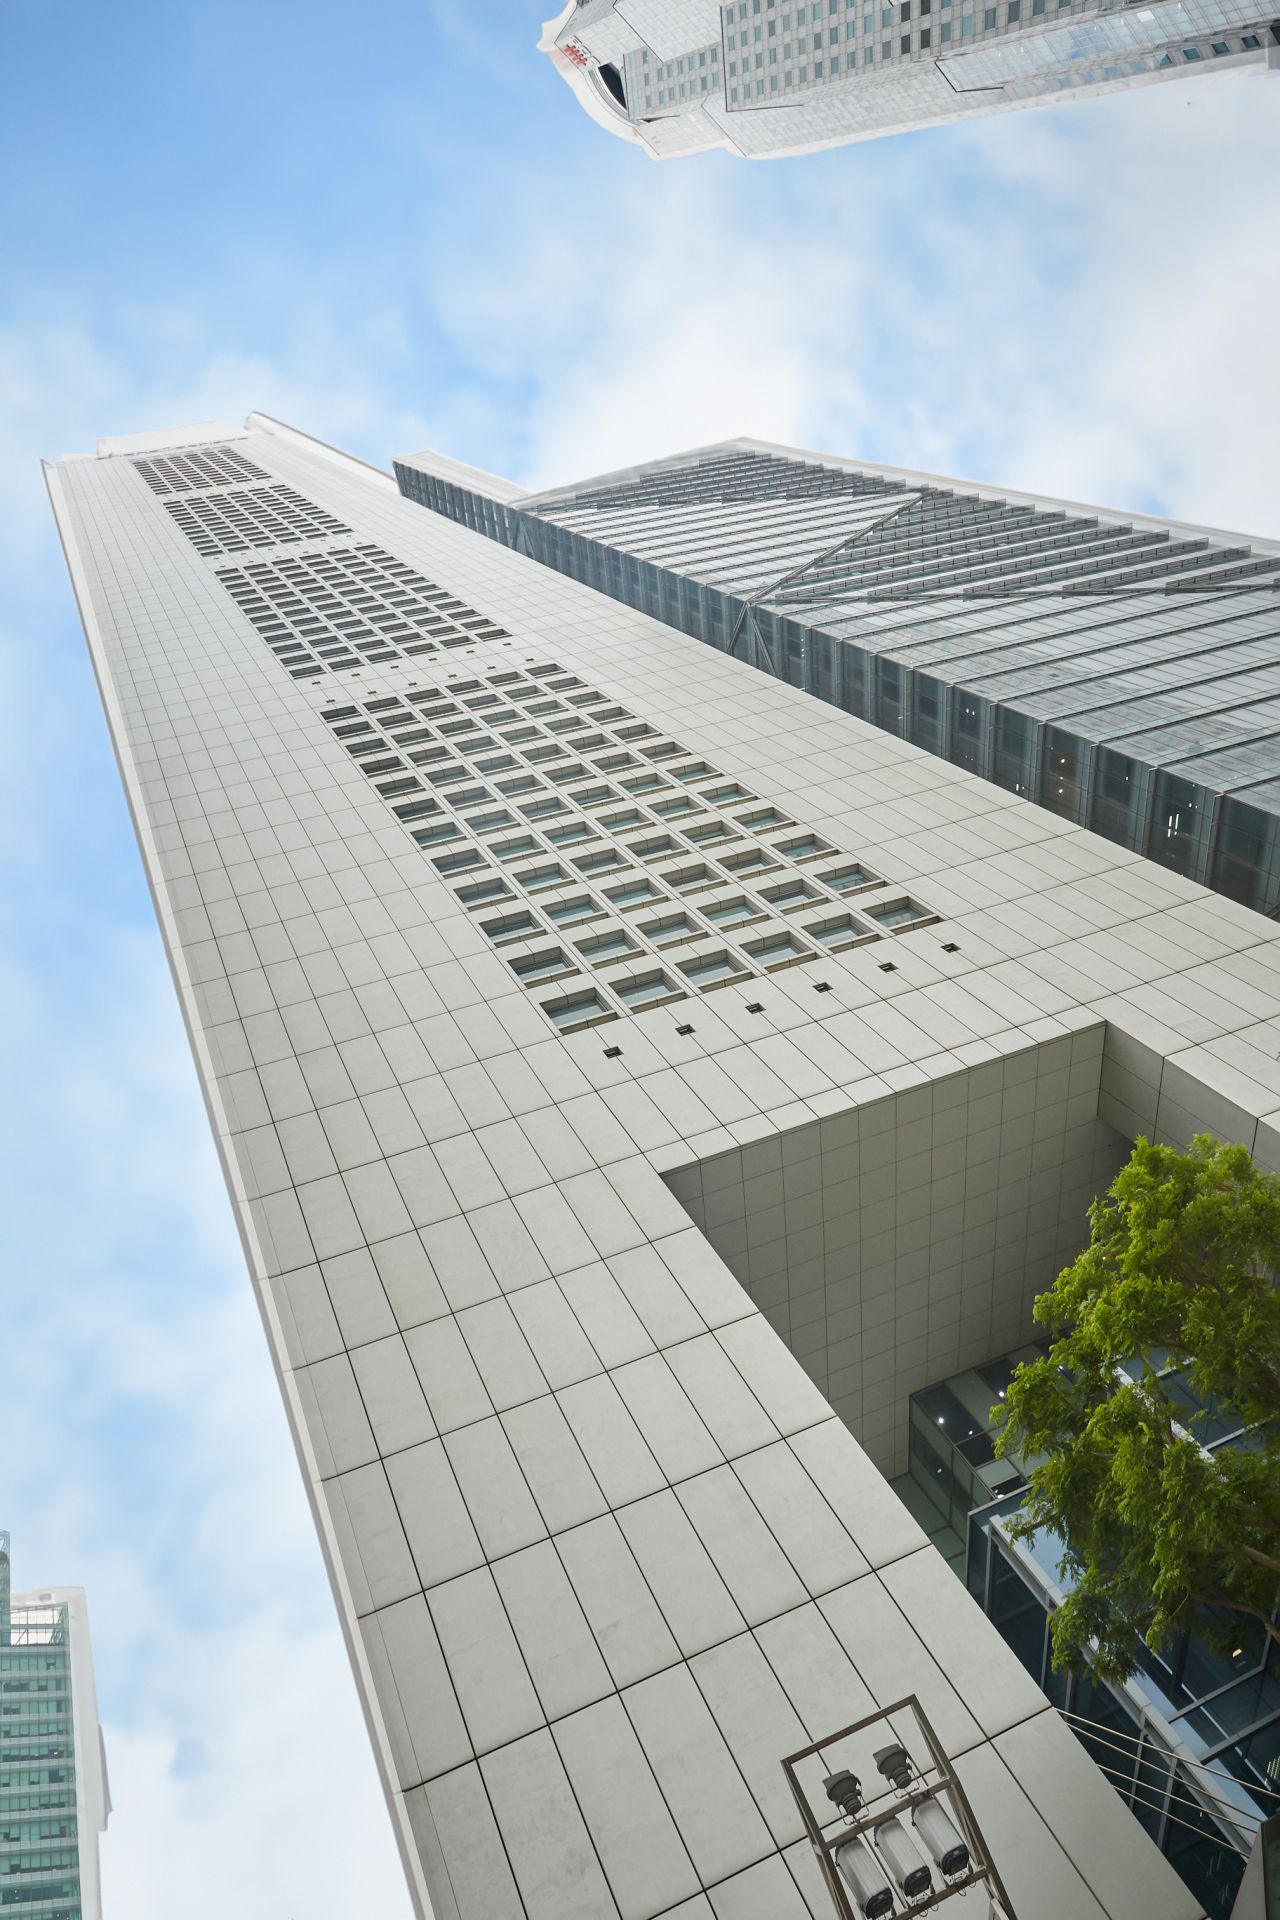 Monjasa moves into new Singapore office at 1 Raffles Place building